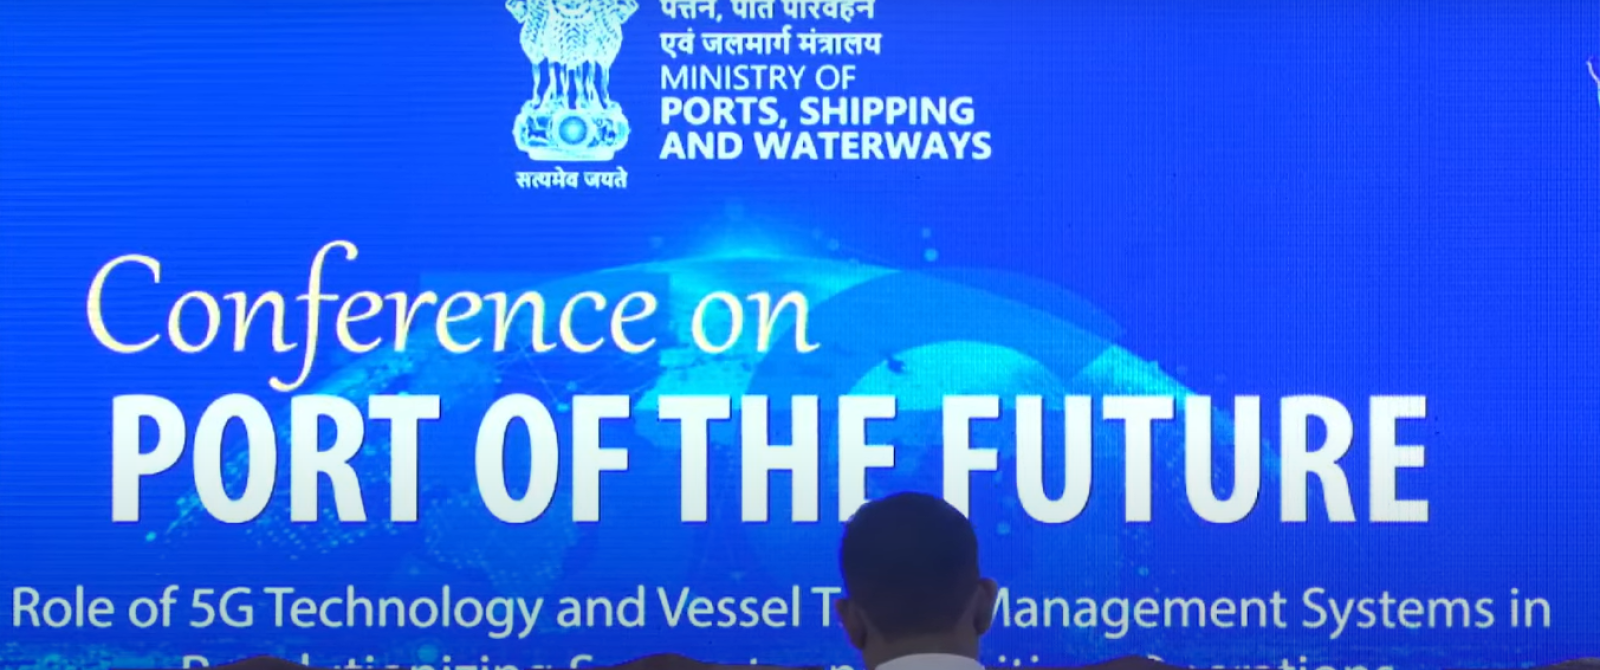 Conference on Port of the Future